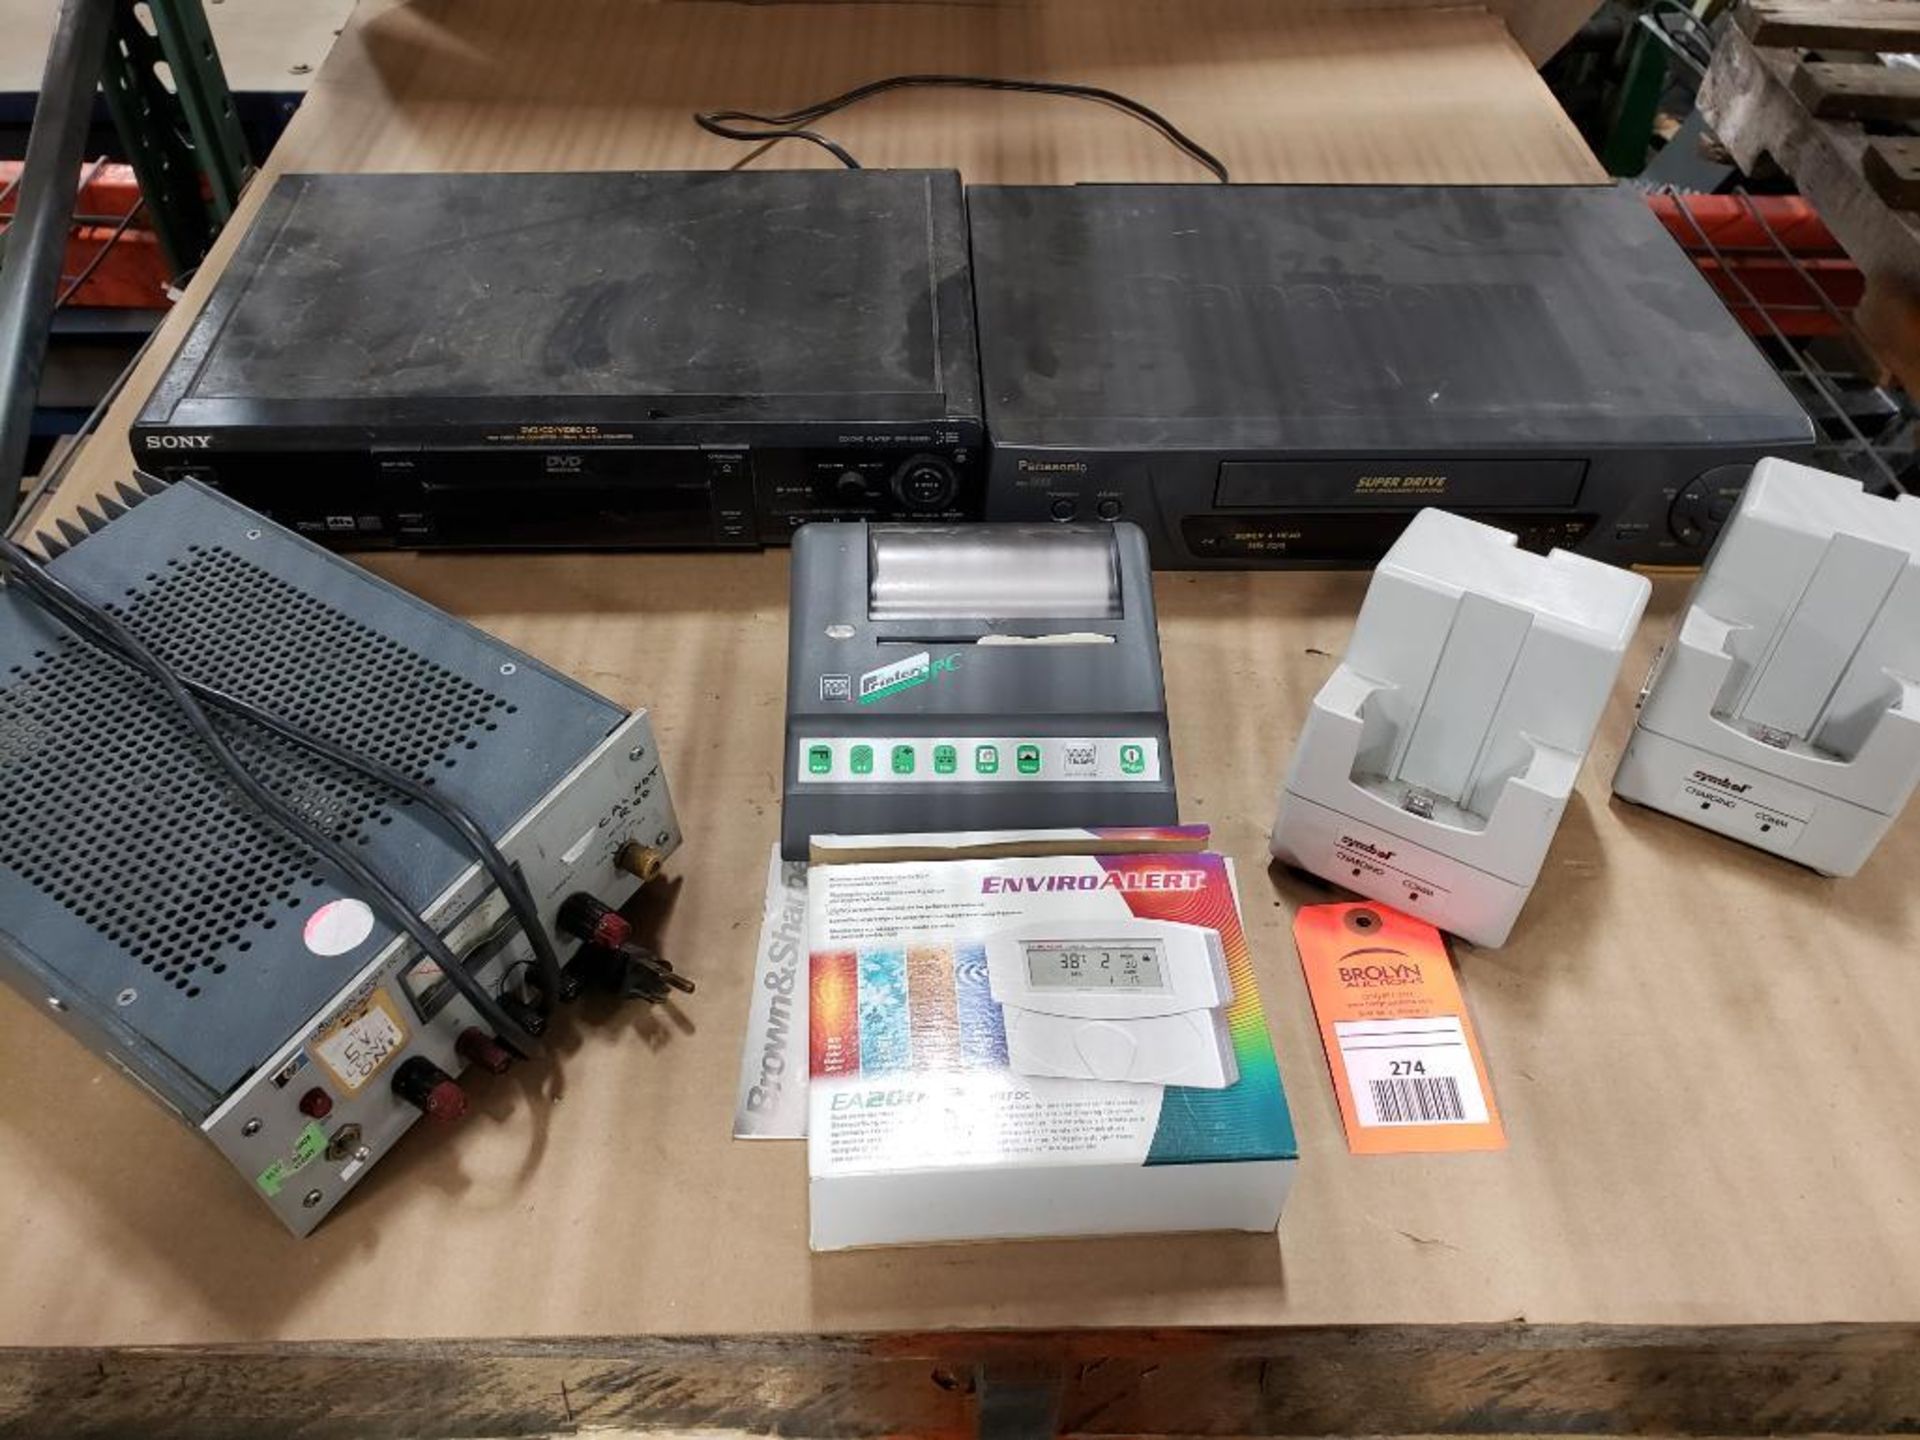 Assorted electrical power supply, charging stations, VCR, DVD players.